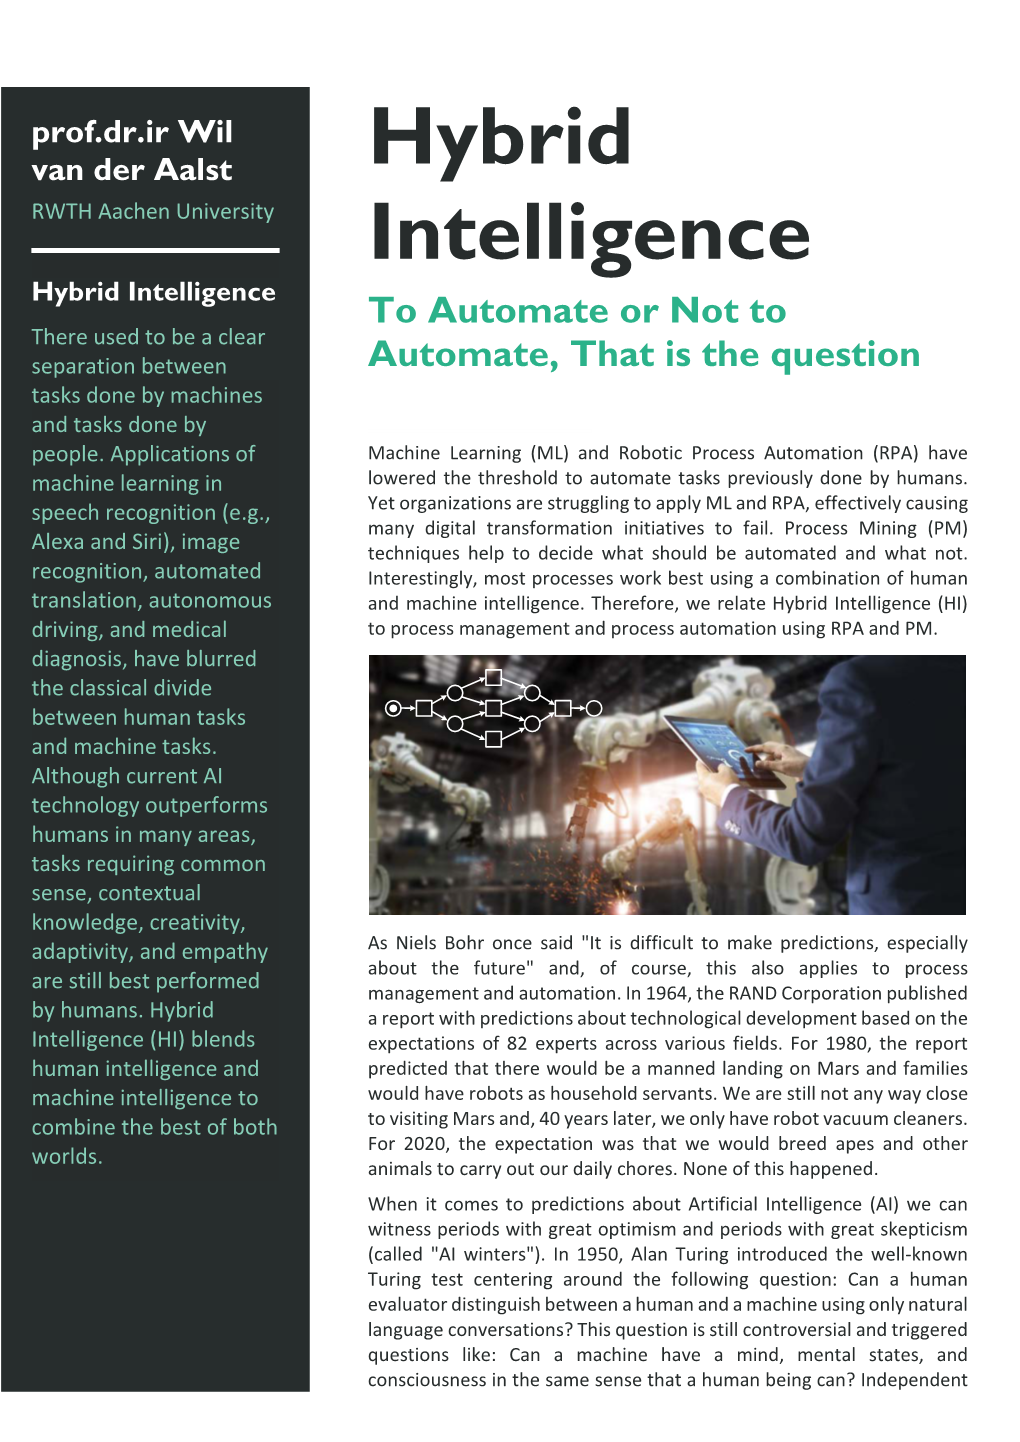 Hybrid Intelligence to Automate Or Not to There Used to Be a Clear Separation Between Automate, That Is the Question Tasks Done by Machines and Tasks Done by People